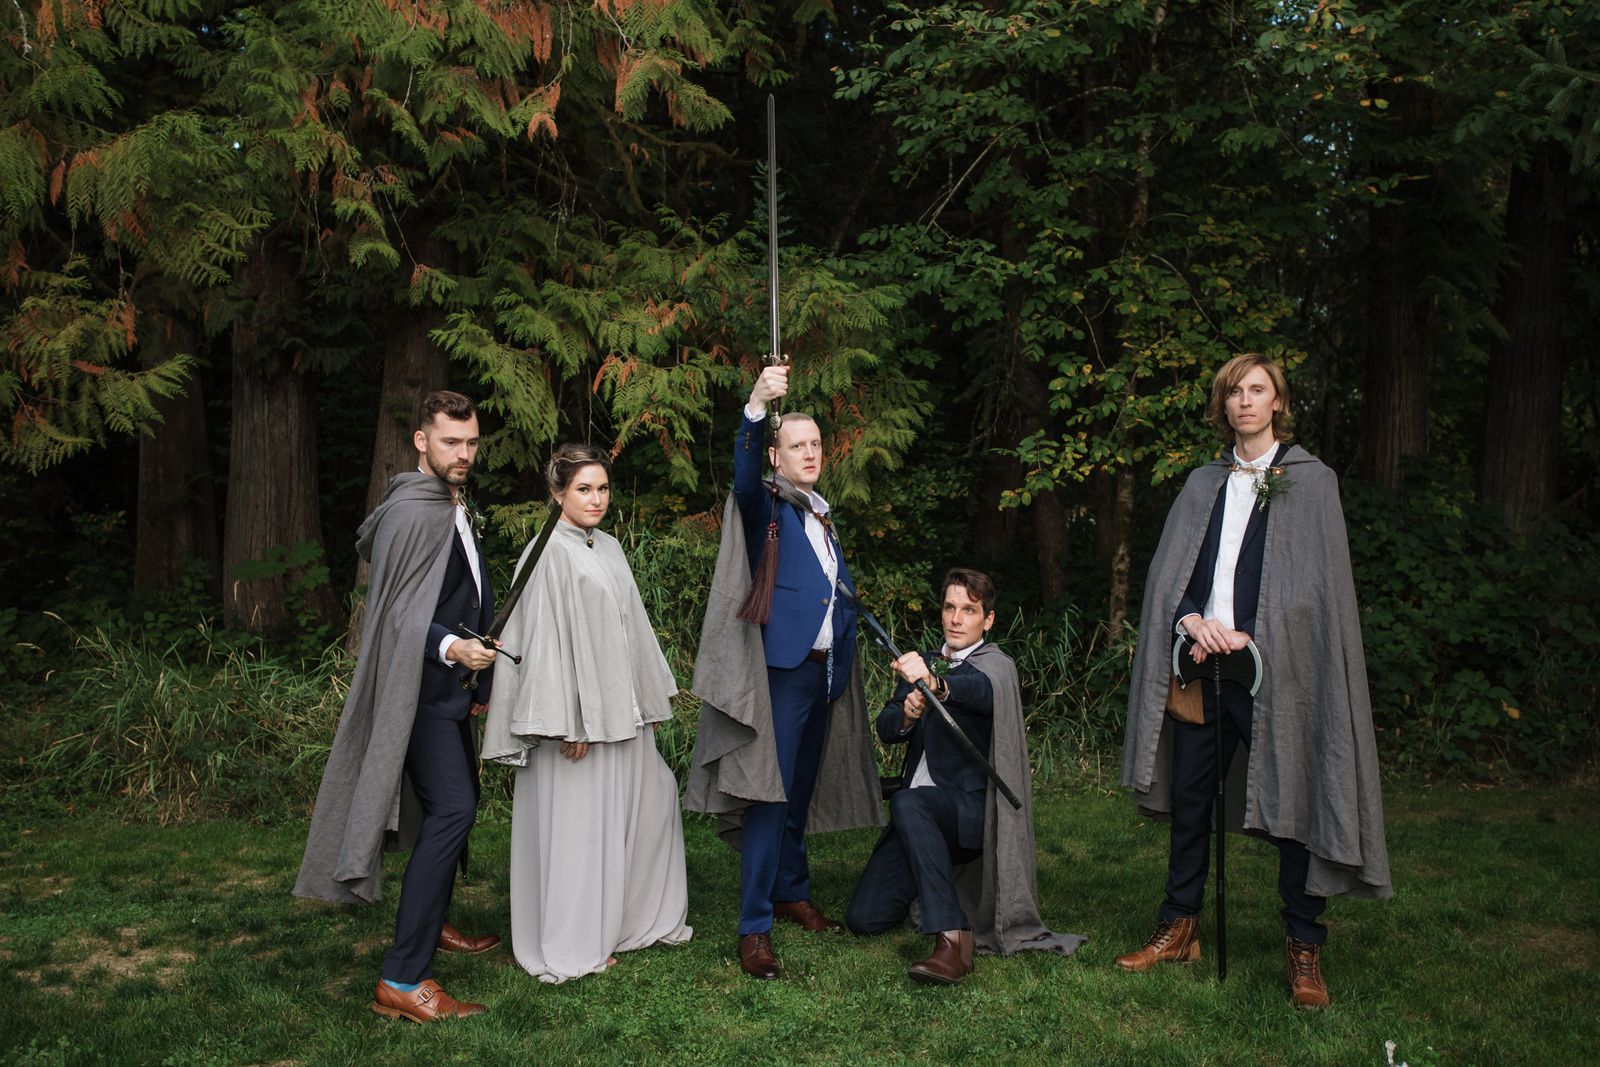 Lord-of-the-Rings-wedding